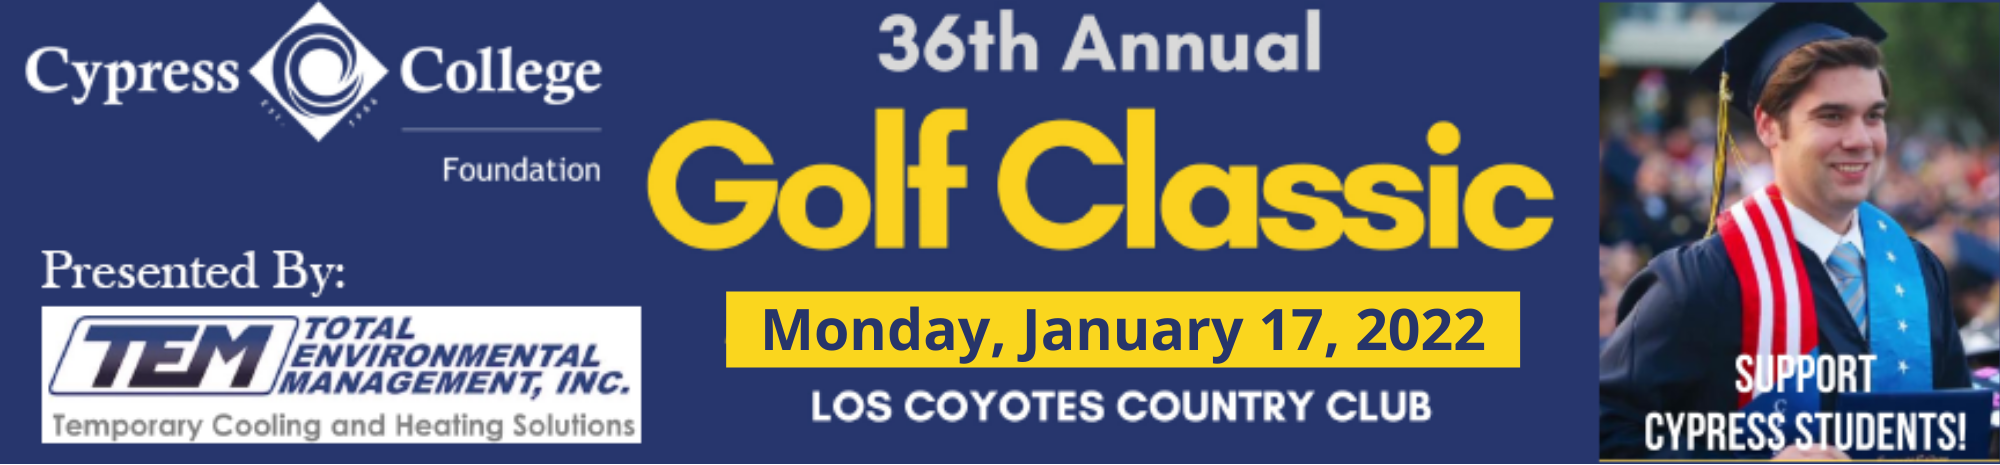 Flyer for the 36th annual Golf Classic